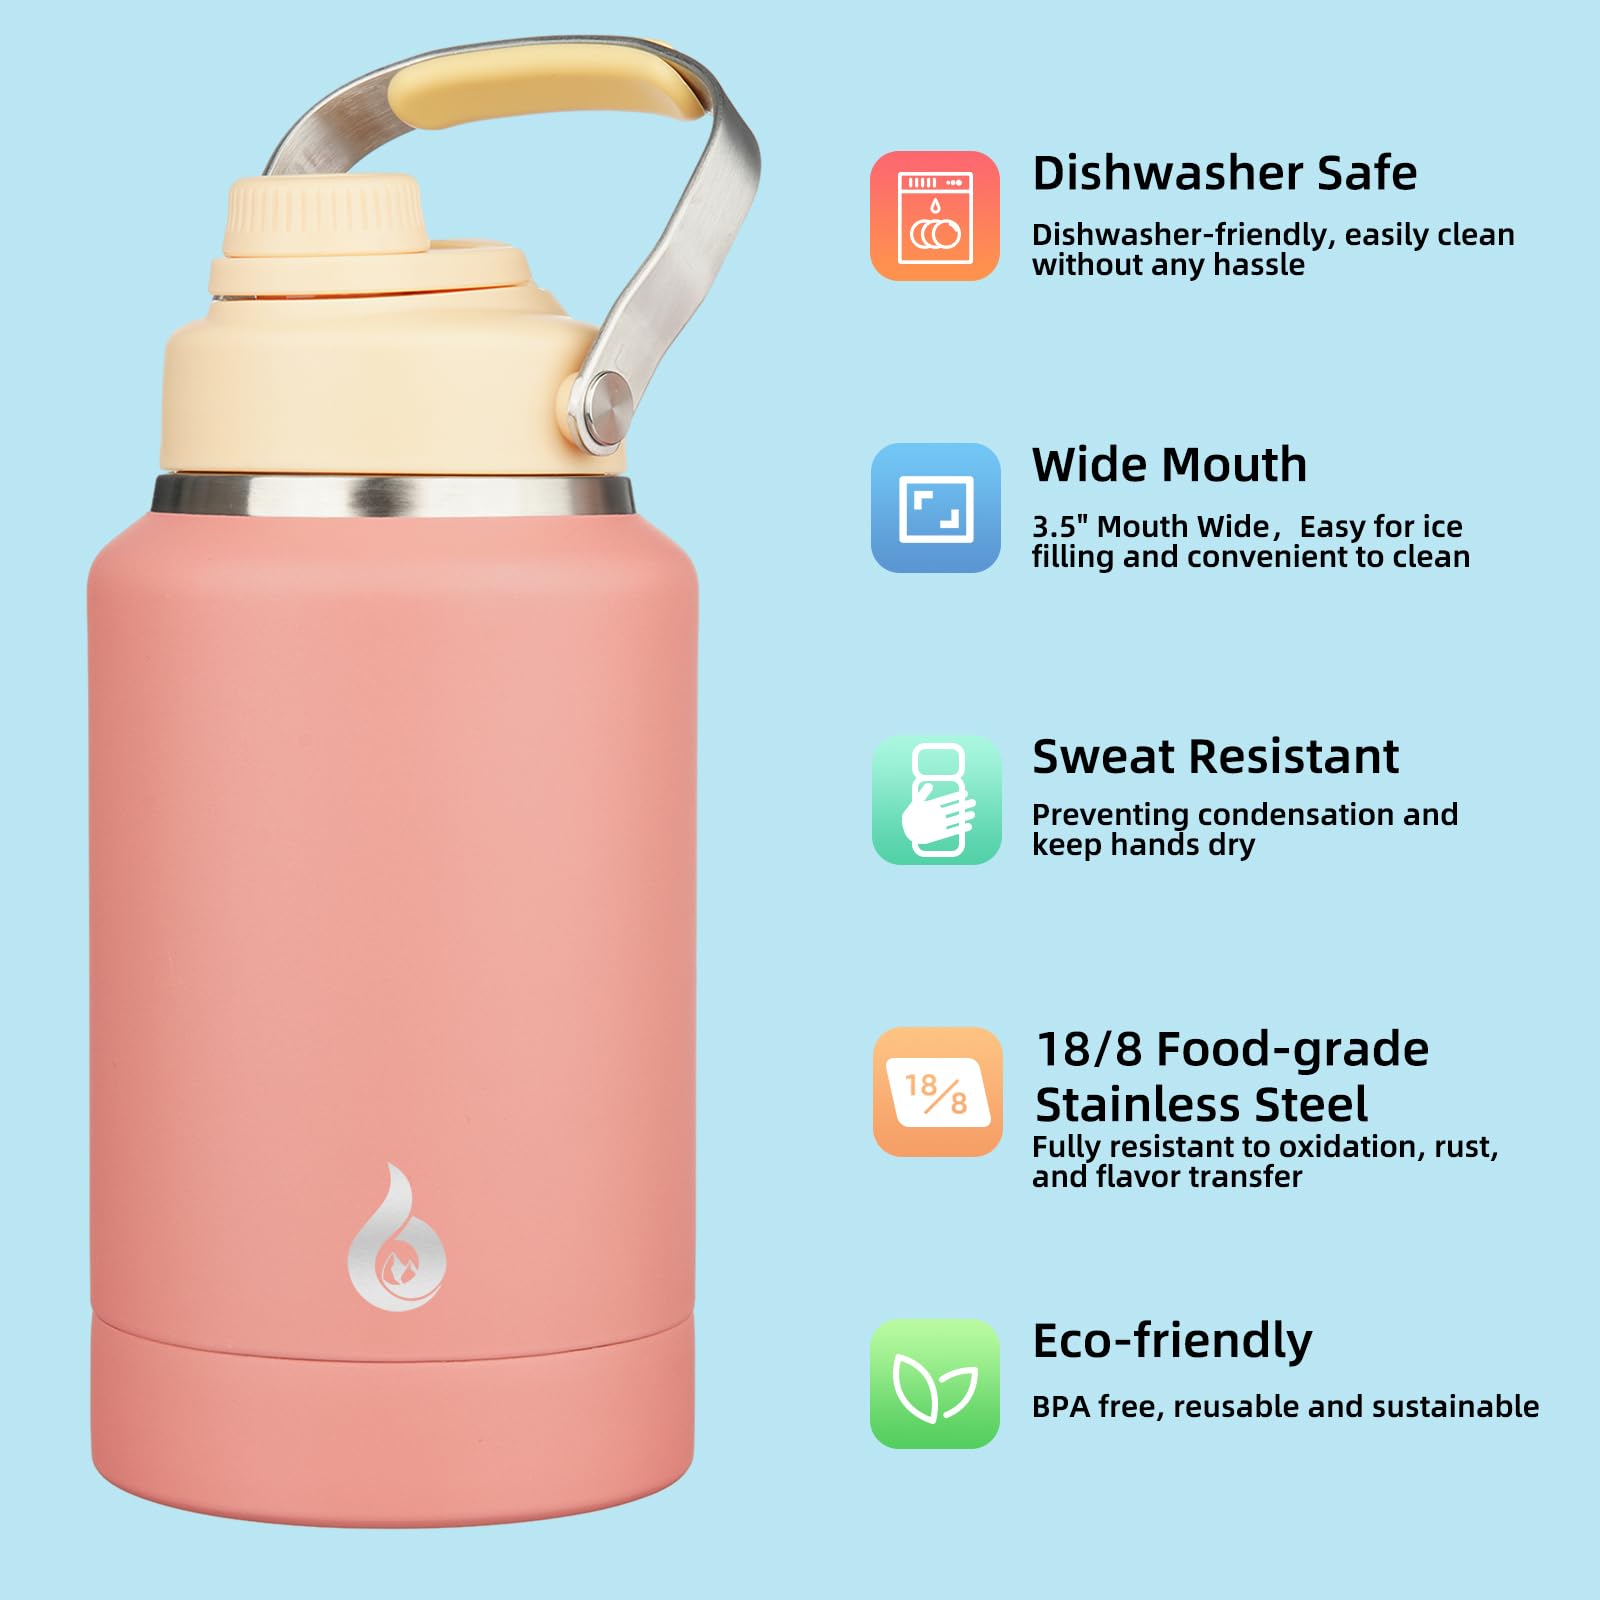 BJPKPK 64oz Insulated Water Bottles, Dishwasher Safe Half gallon Water Bottle with Metal Handle, BPA Free Spout Lid & Detachable Bowl, Large Stainless Steel Water Jugs, Pink